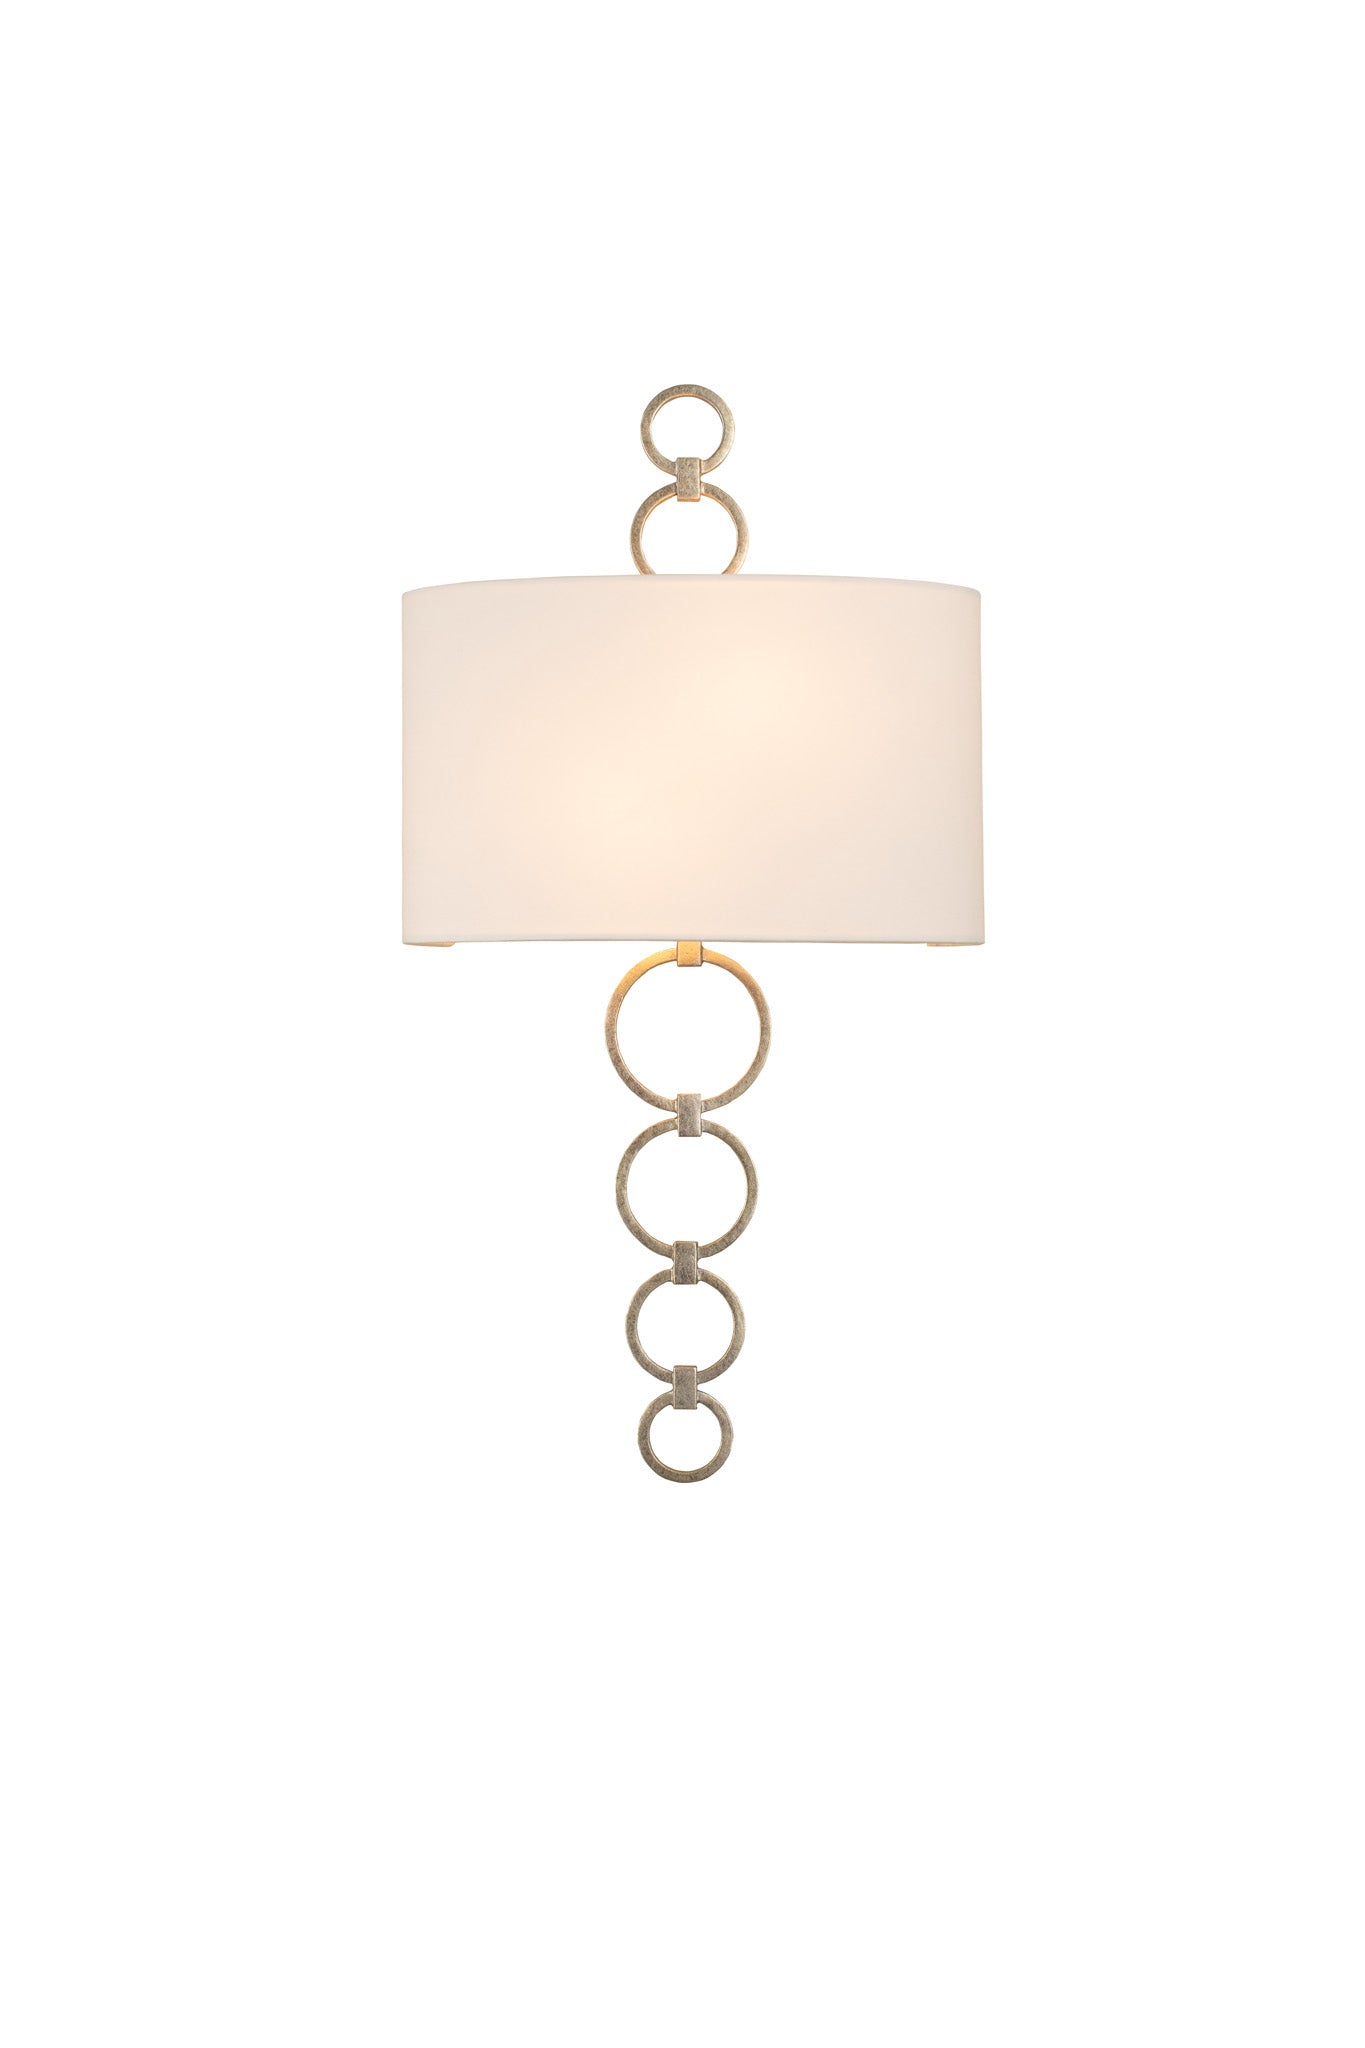 Carlyle 2 Light ADA Wall Sconce